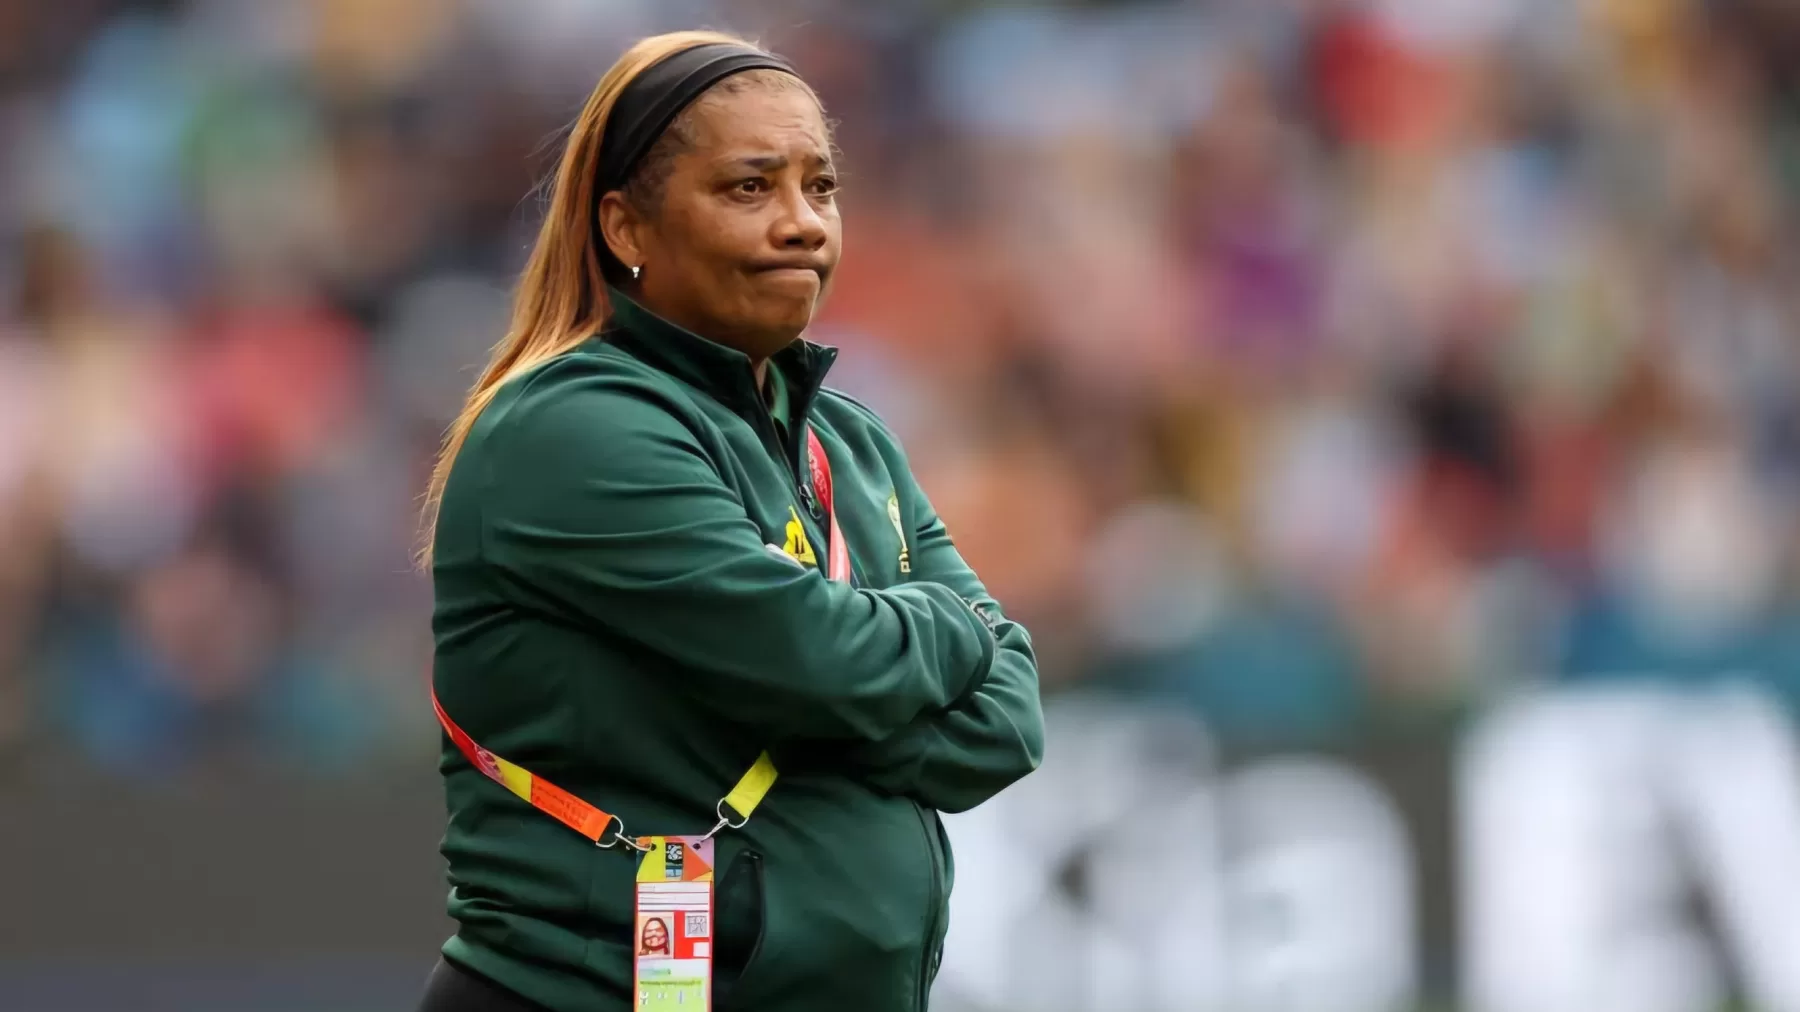 Cape Peninsula University of Technology will on Thursday confer Banyana Banyana coach Desiree Ellis with an Honorary Doctorate